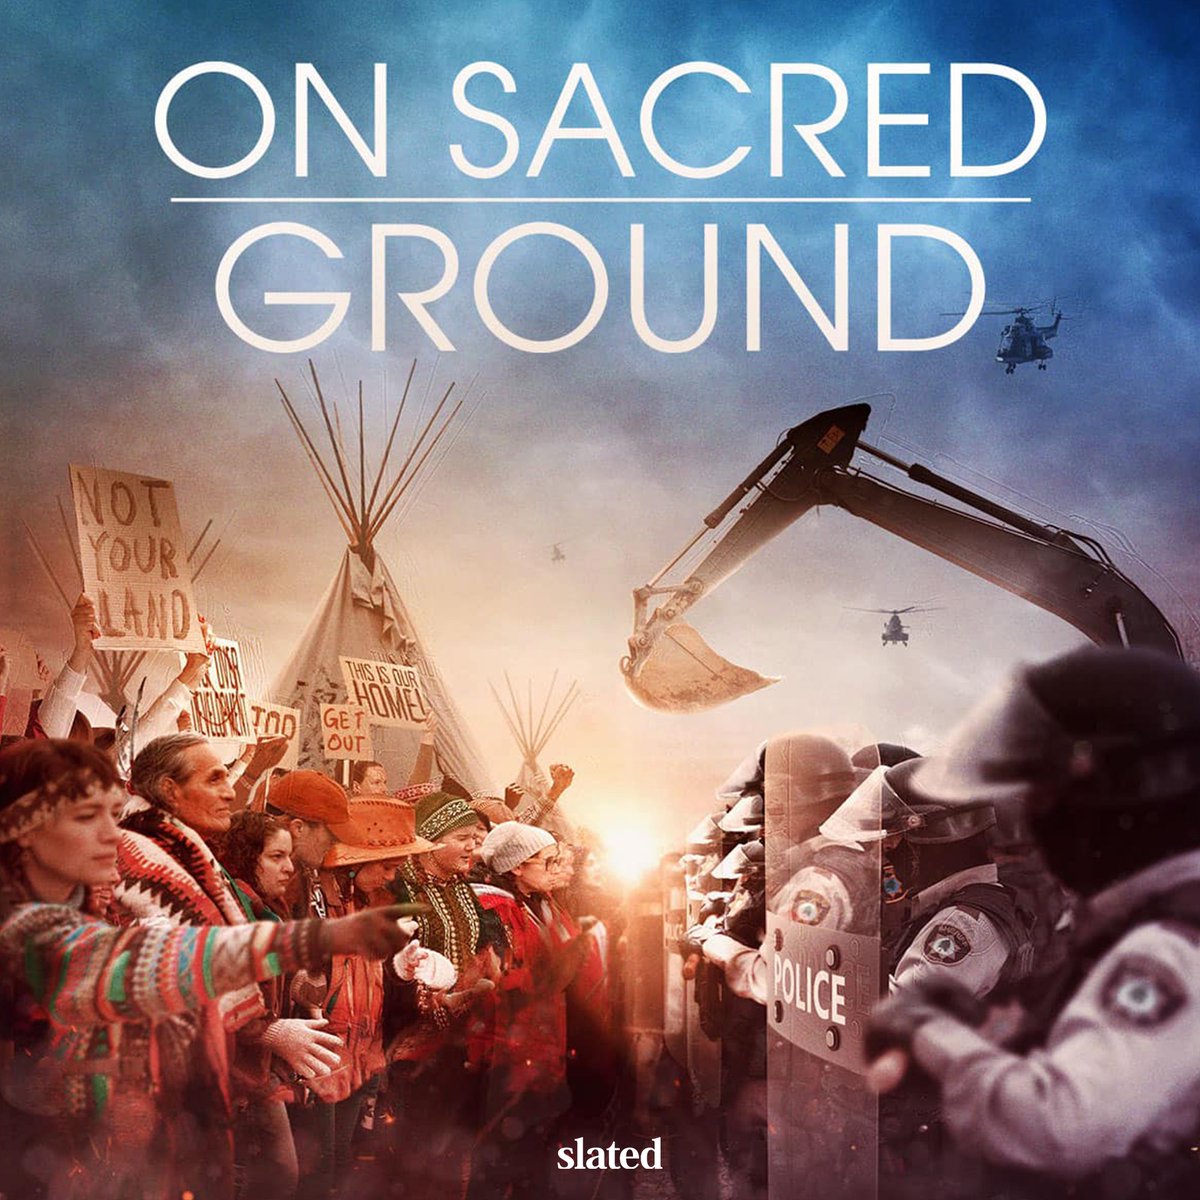 ON SACRED GROUND, the first narrative film about the Dakota Access Pipeline is available TODAY in select theatres and on demand. ow.ly/Hrkg50Mq74Y #DakotaAccessPipeline #DAPL #film #drama #activism